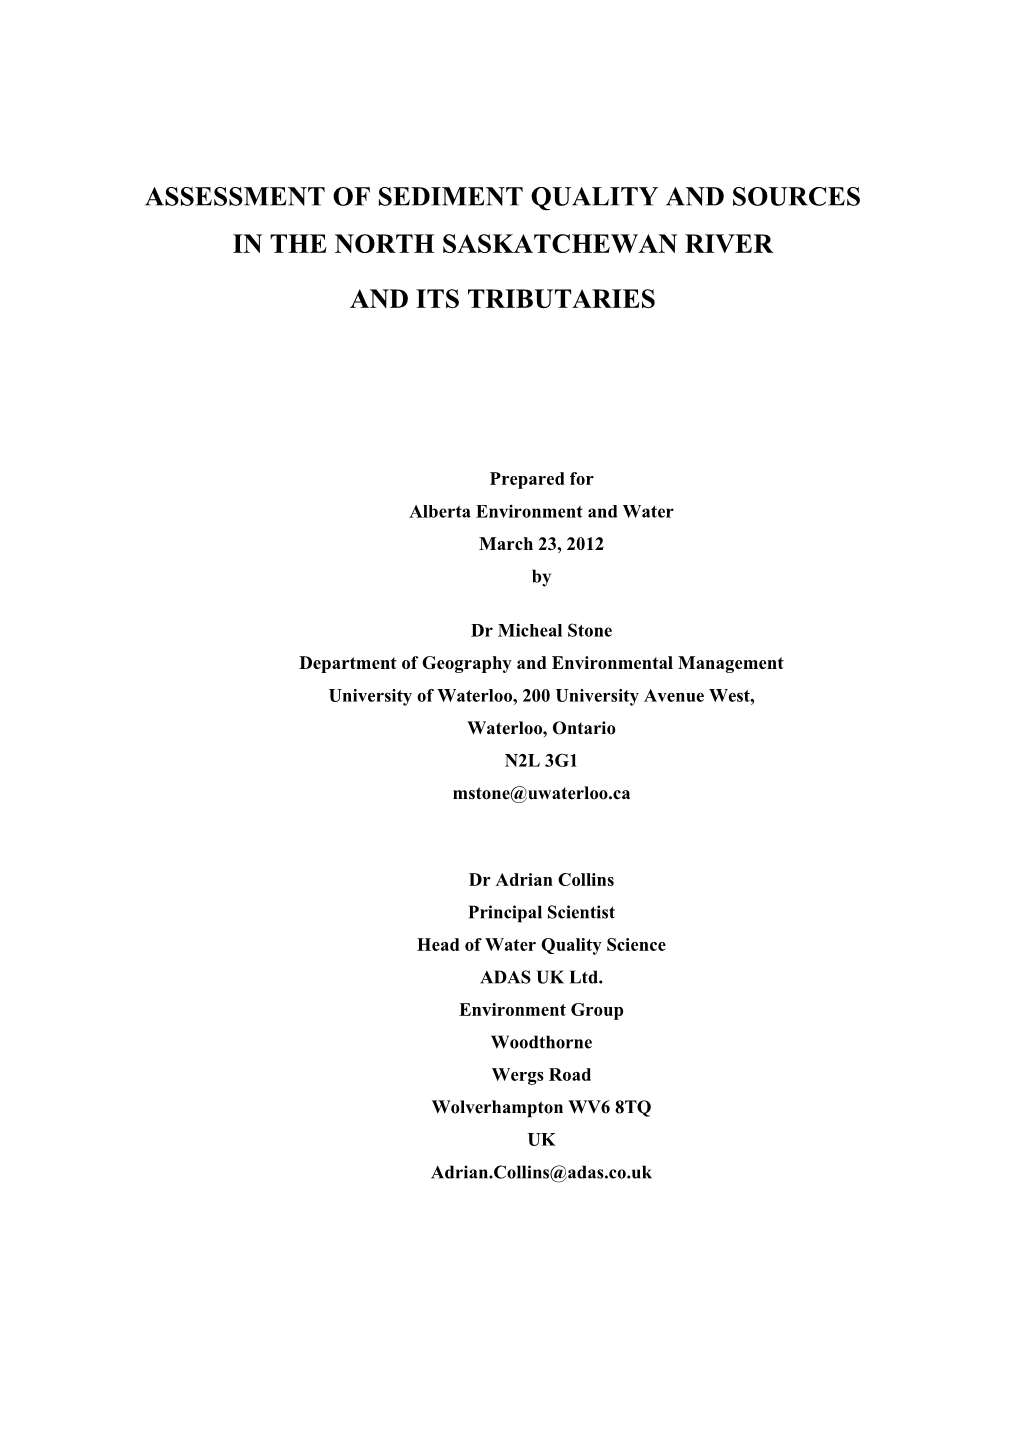 Assessment of Sediment Quality and Sources in the North Saskatchewan River and Its Tributaries